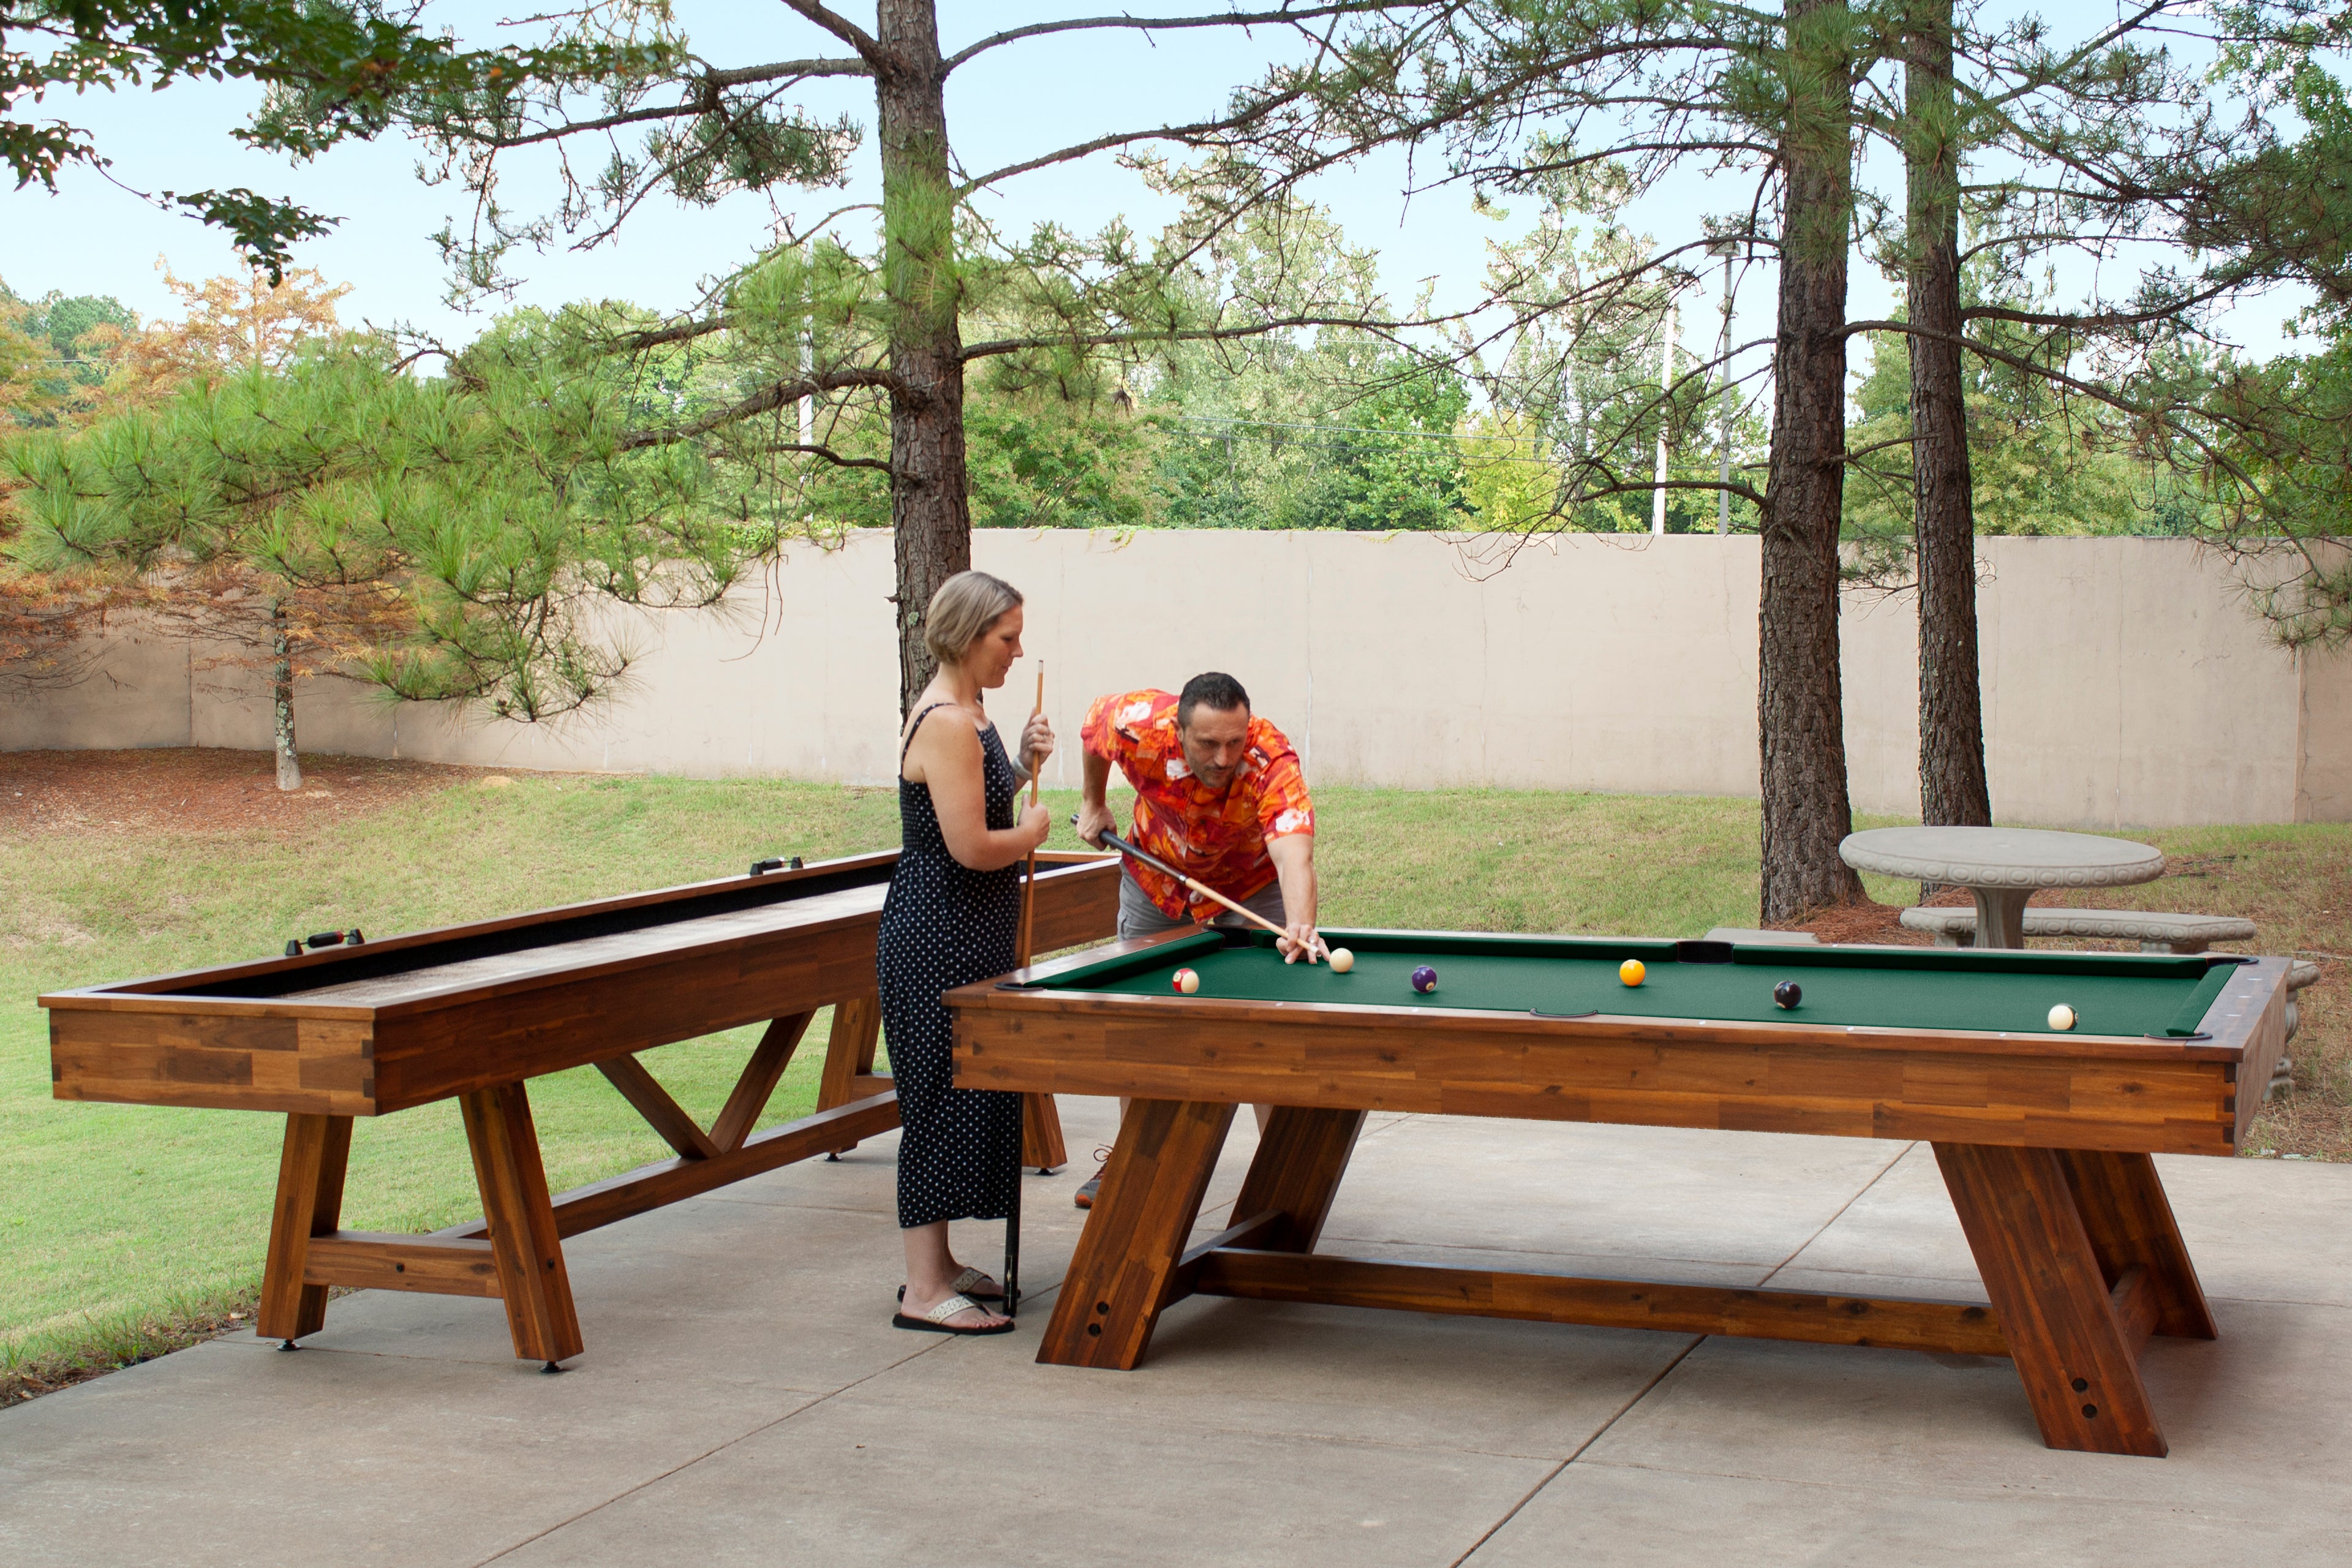 Legacy Billiards 7 Ft Barren Outdoor Pool Table in Natural Acacia Finish with People Playing Pool Outside and Emory Outdoor Shuffleboard